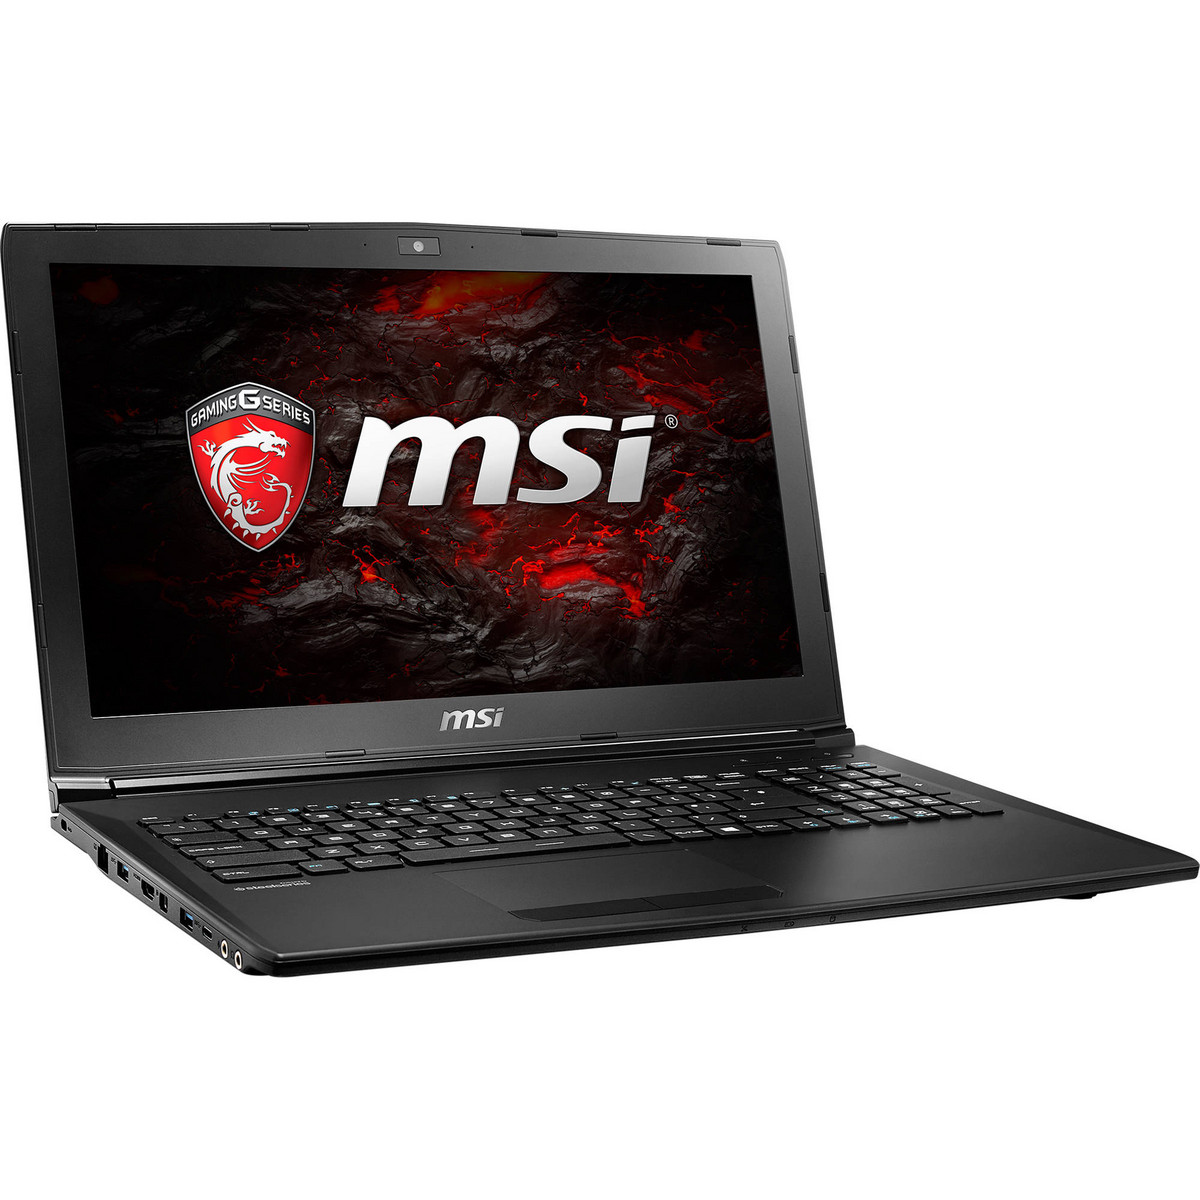 Get the MSI GL62M gaming laptop with GeForce GTX 1050 Ti for only $869.